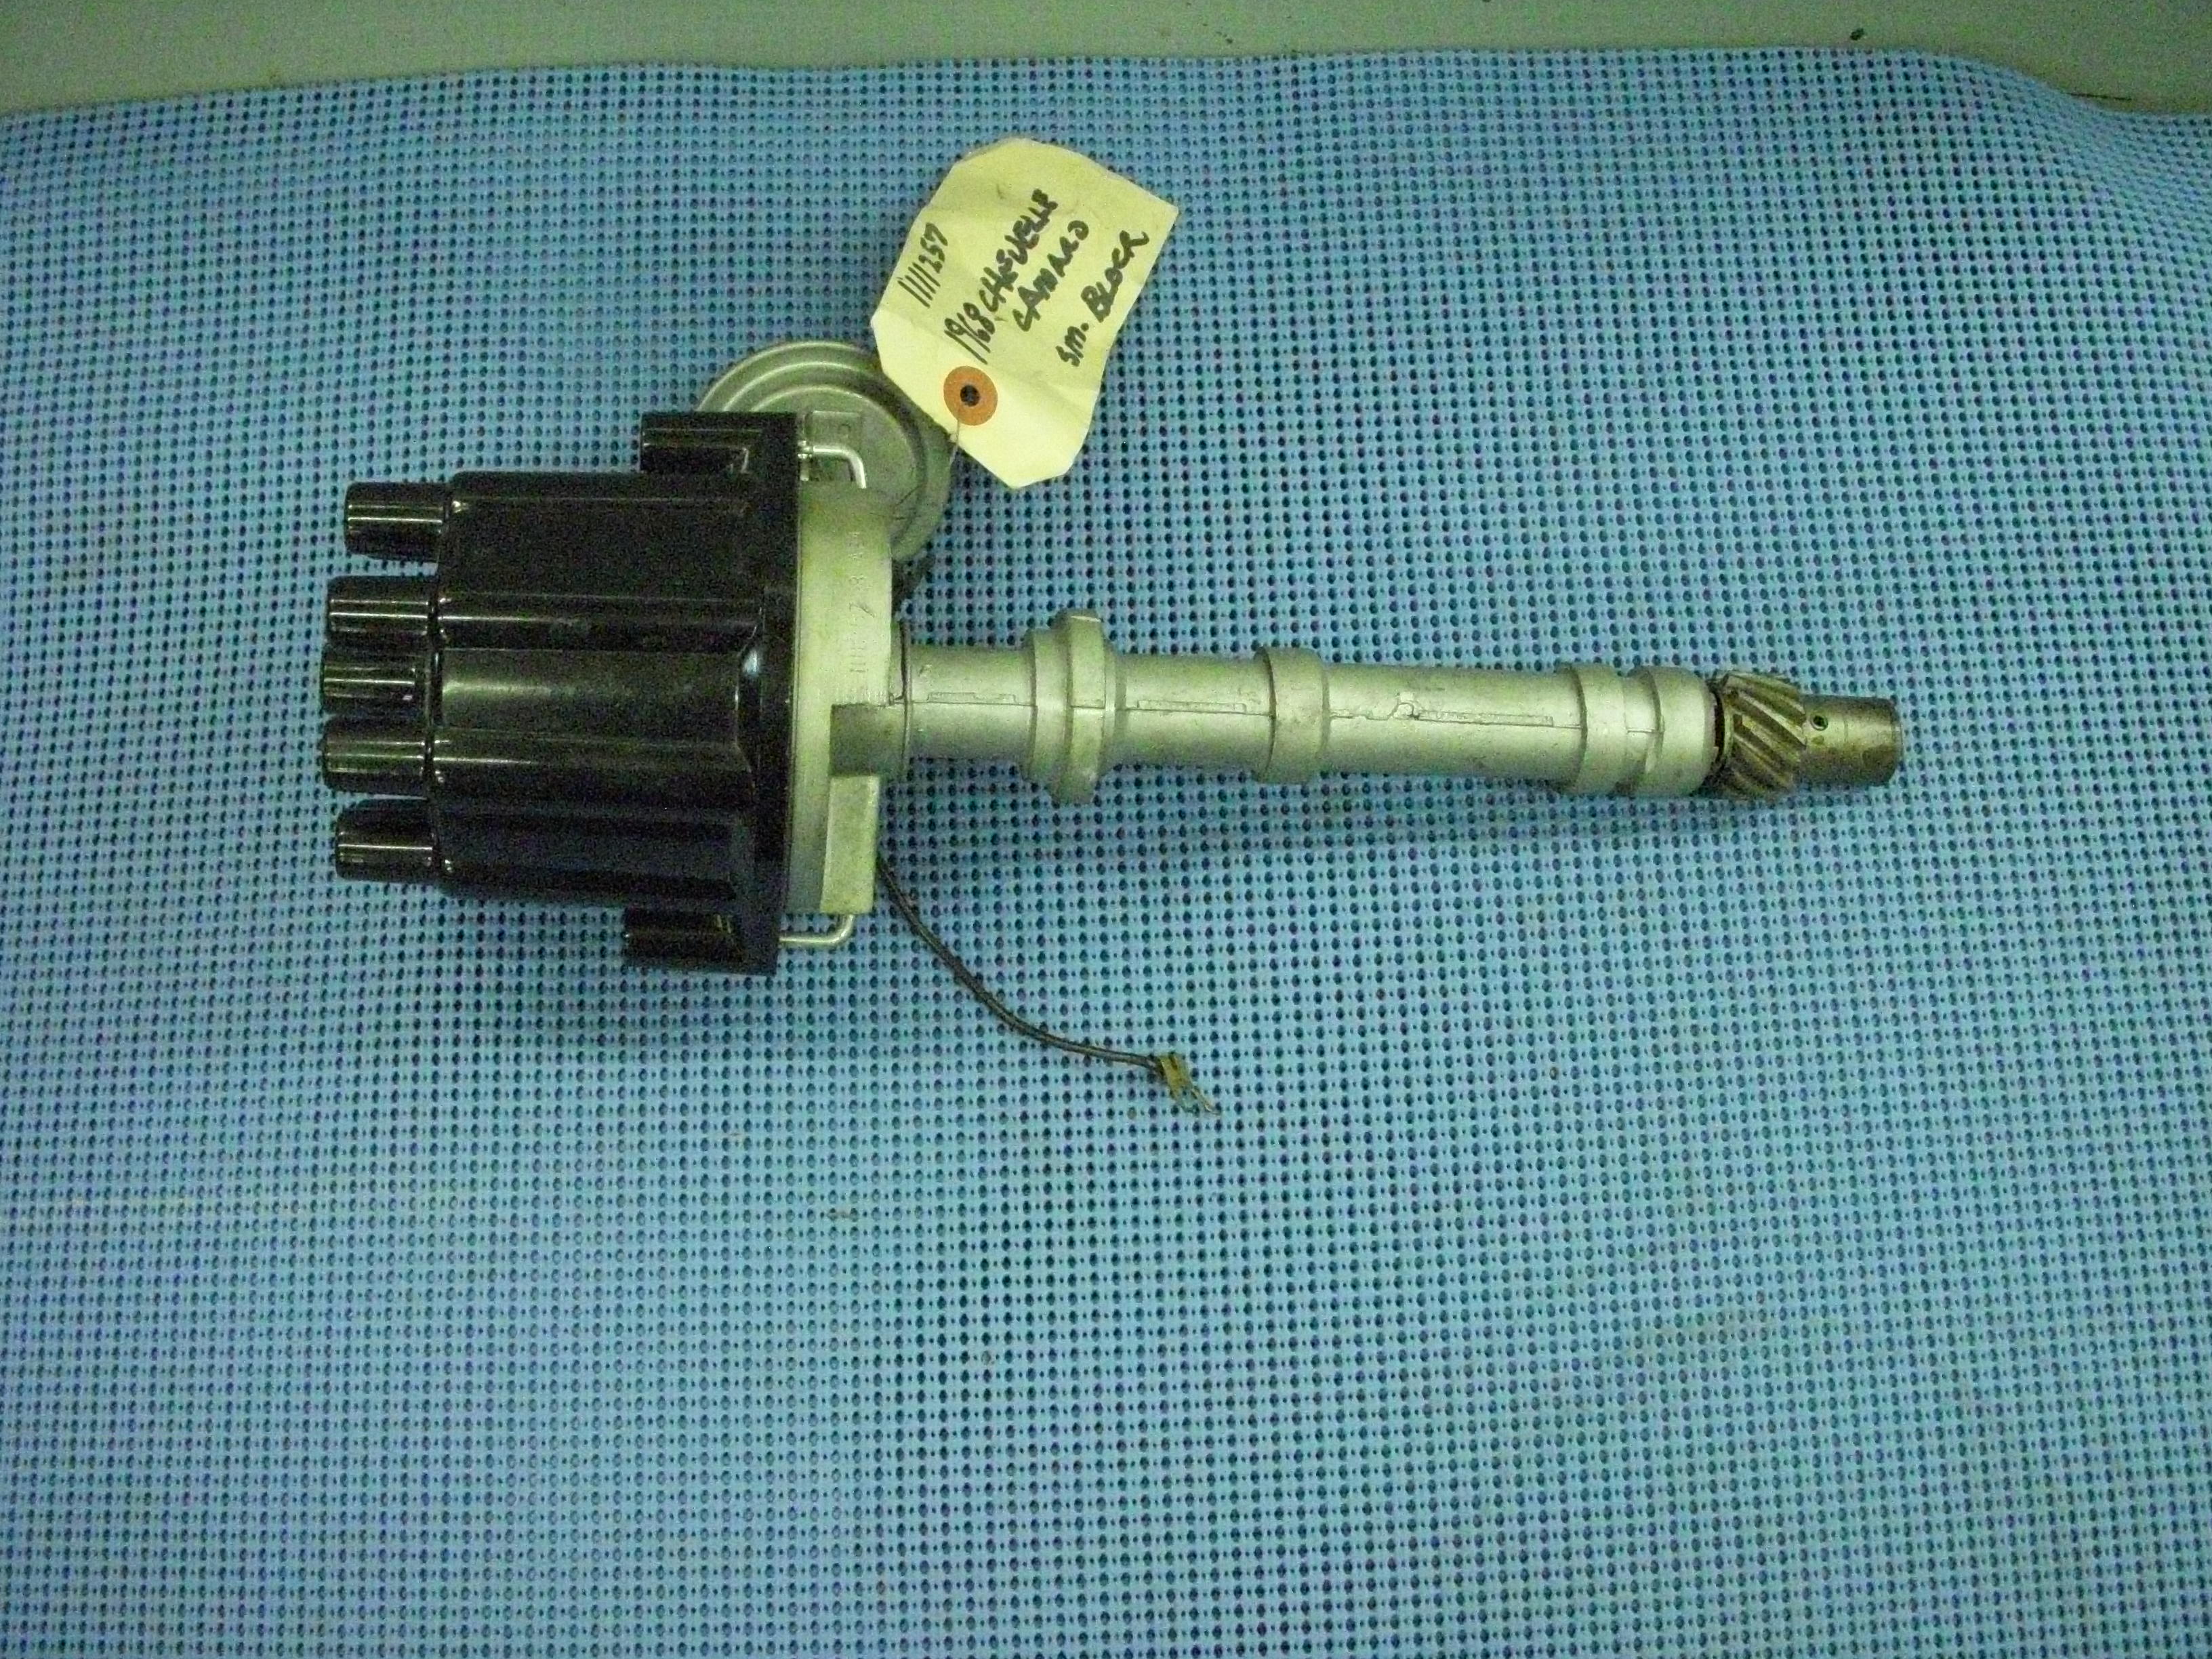 1968 Chevrolet 307 Ignition Distributor Early Takeoff # 1111257